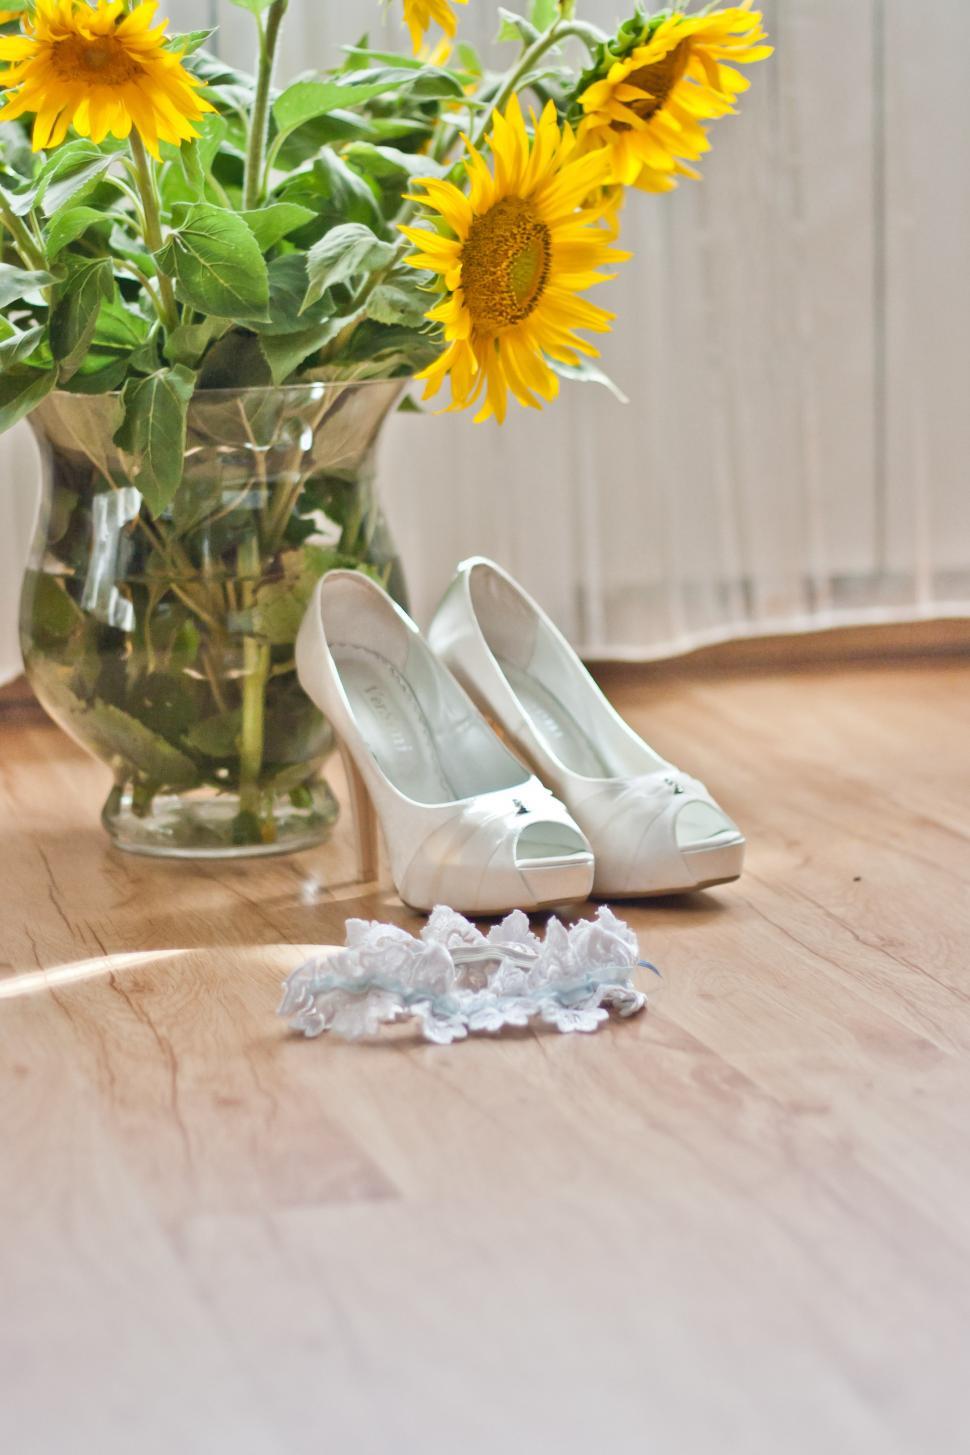 Free Image of Vase of Sunflowers and White Shoes 